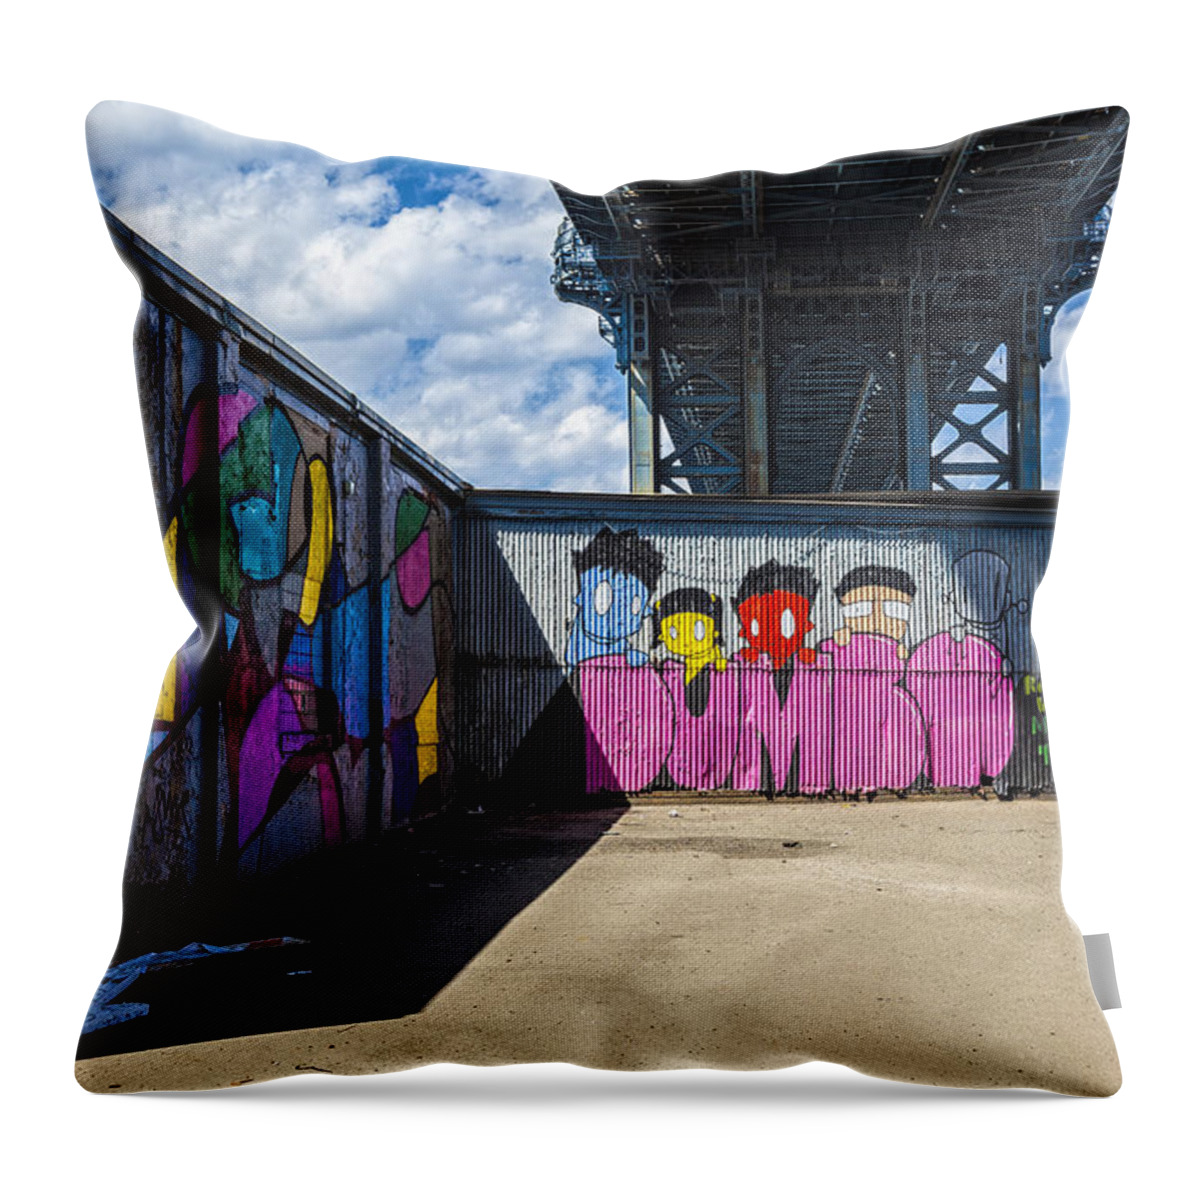 Graffiti Throw Pillow featuring the photograph Dumbo Graffiti by Madeline Ellis